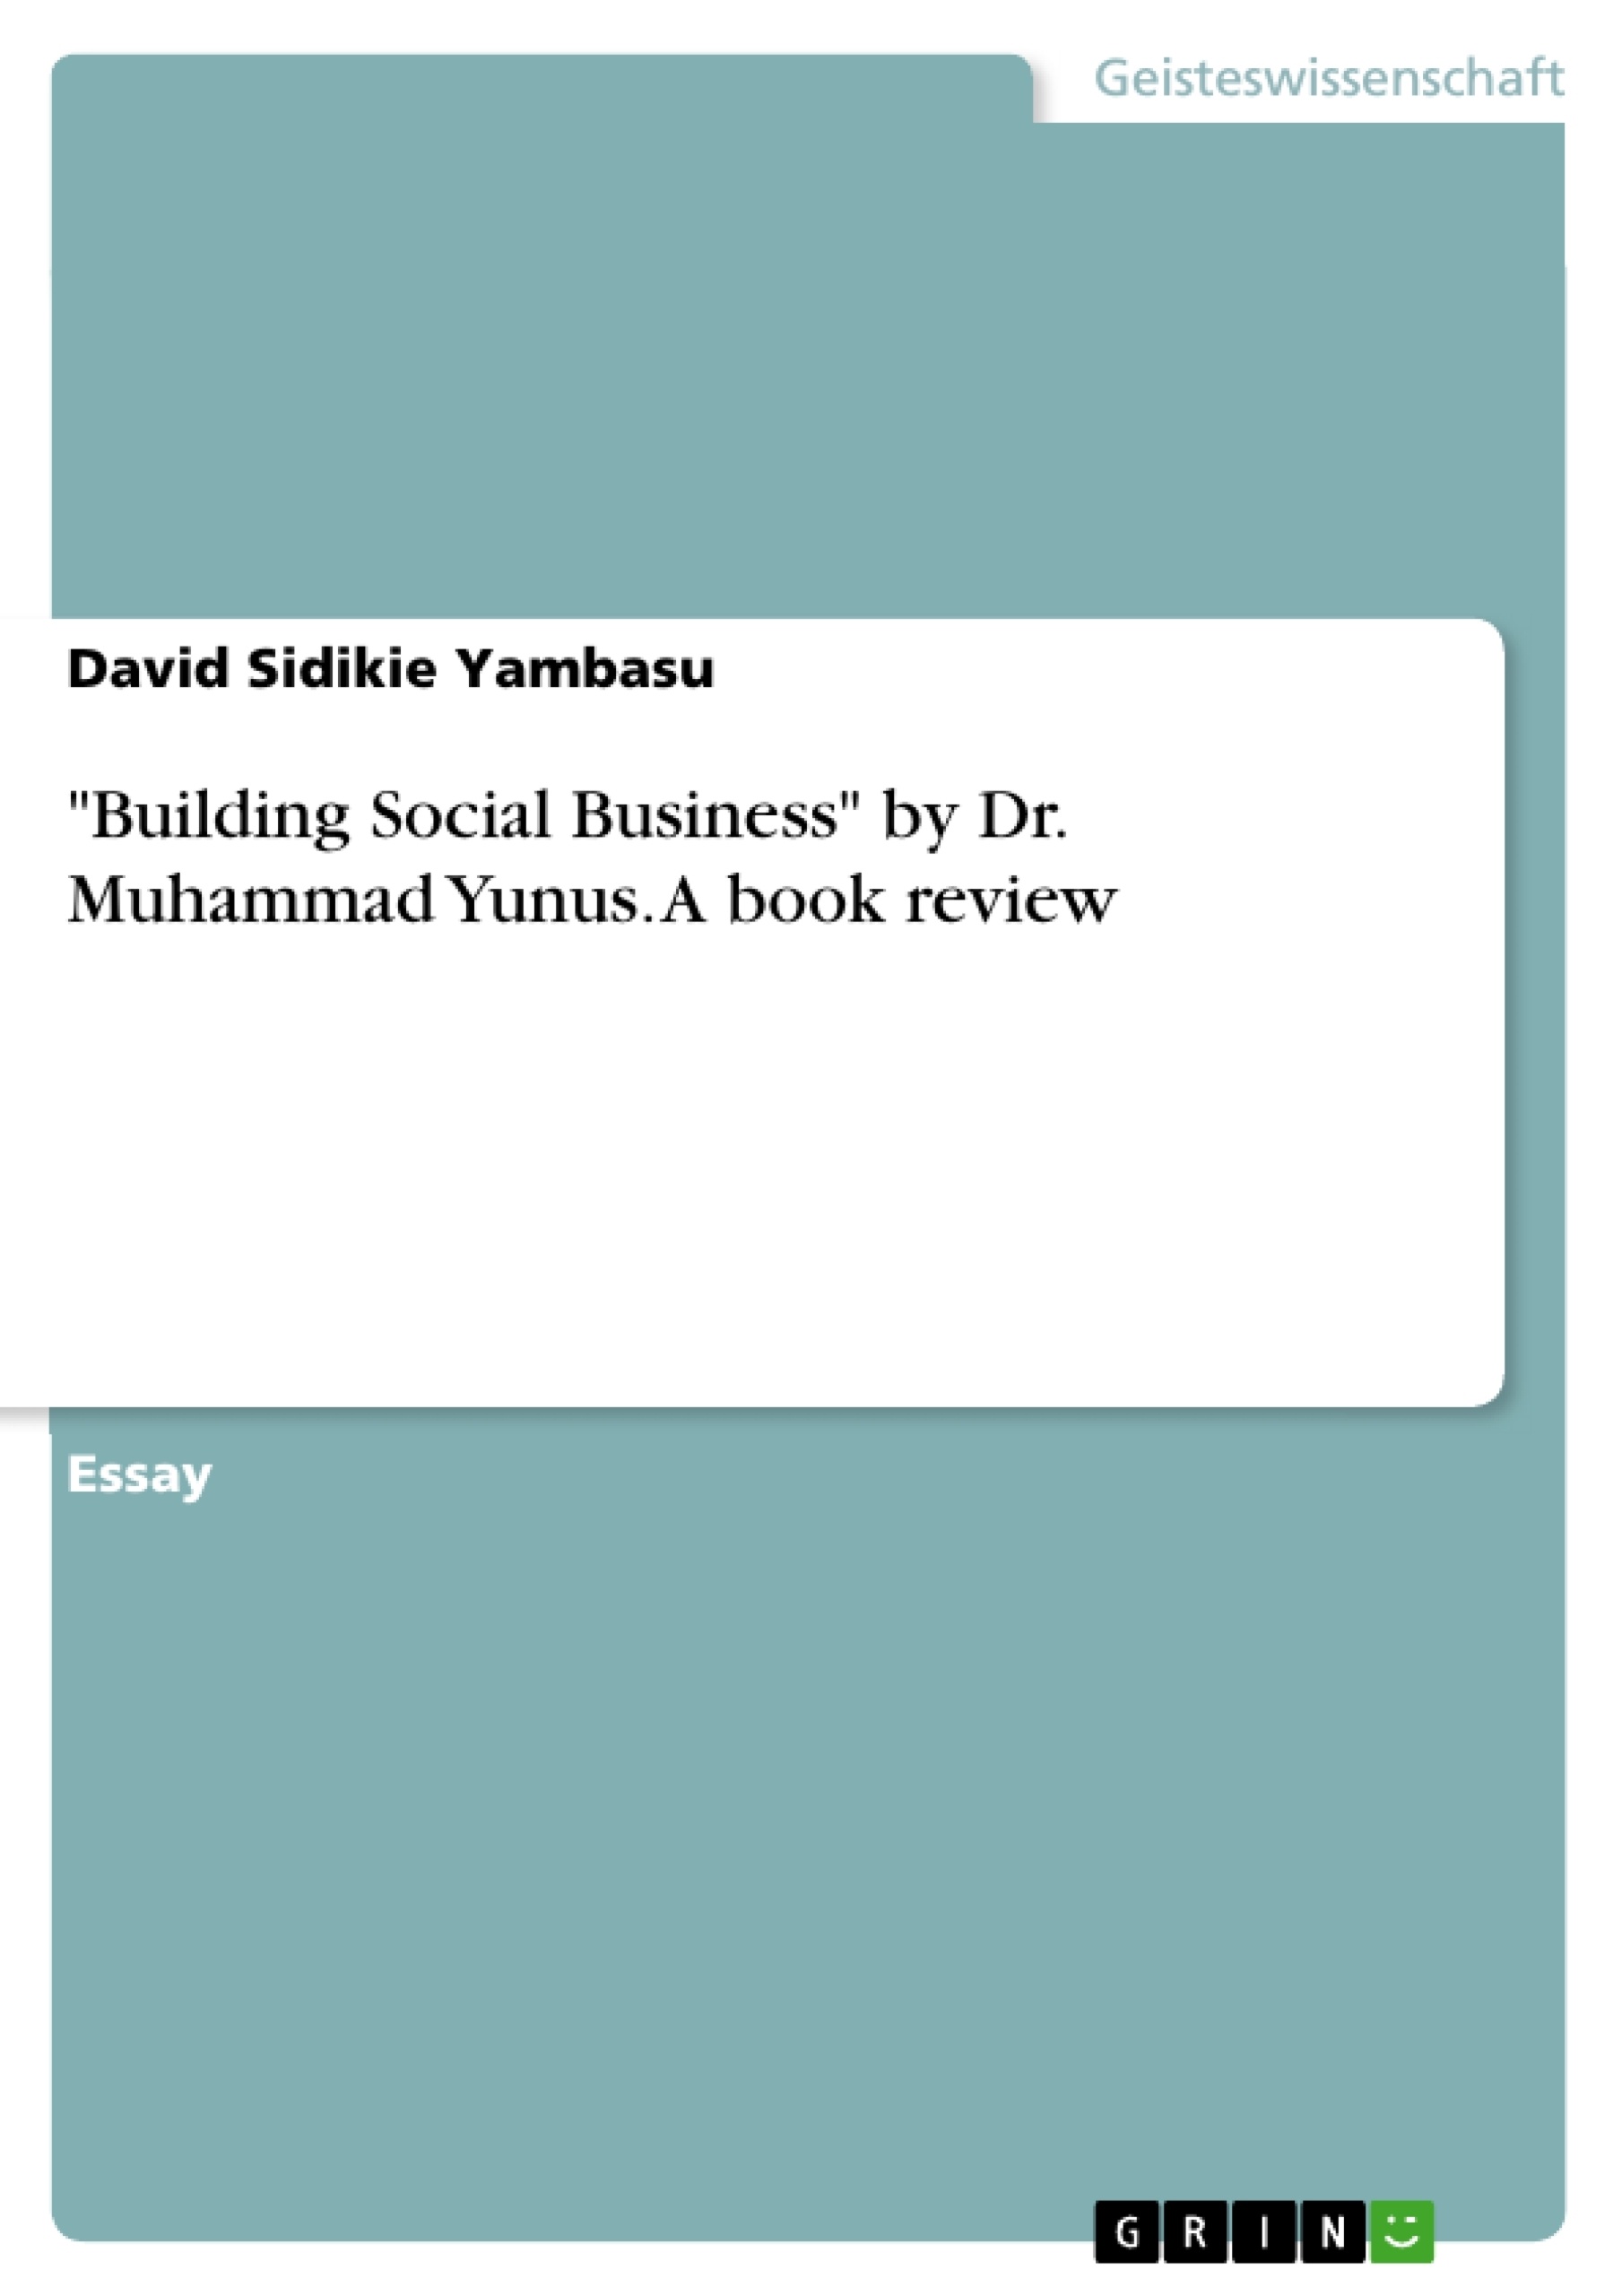 Titre: "Building Social Business" by Dr. Muhammad Yunus. A book review